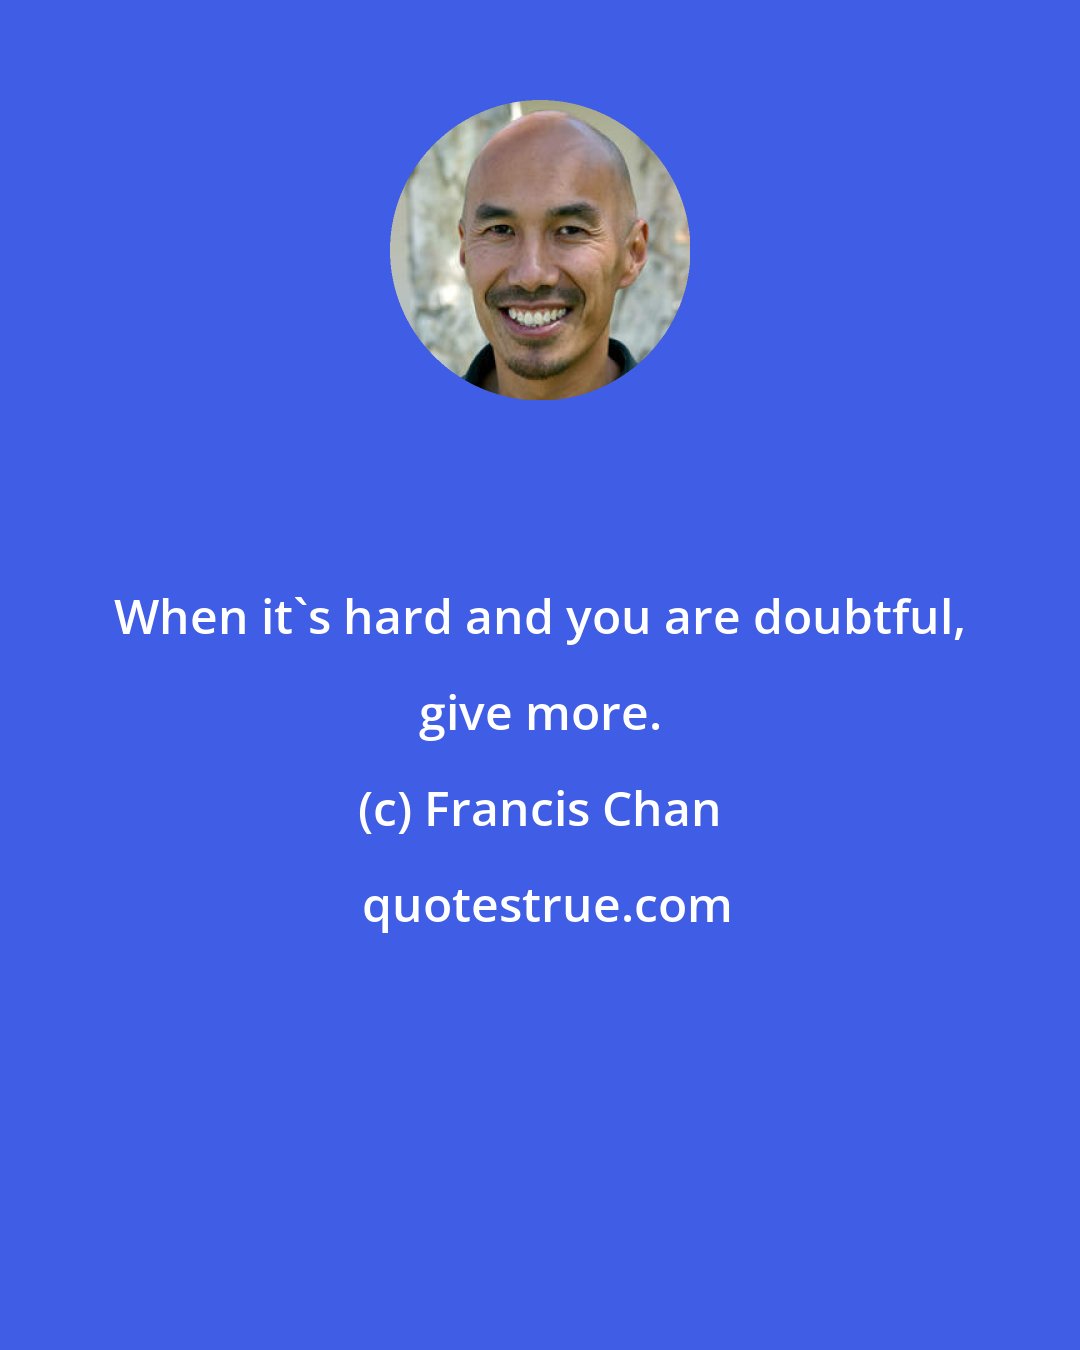 Francis Chan: When it's hard and you are doubtful, give more.